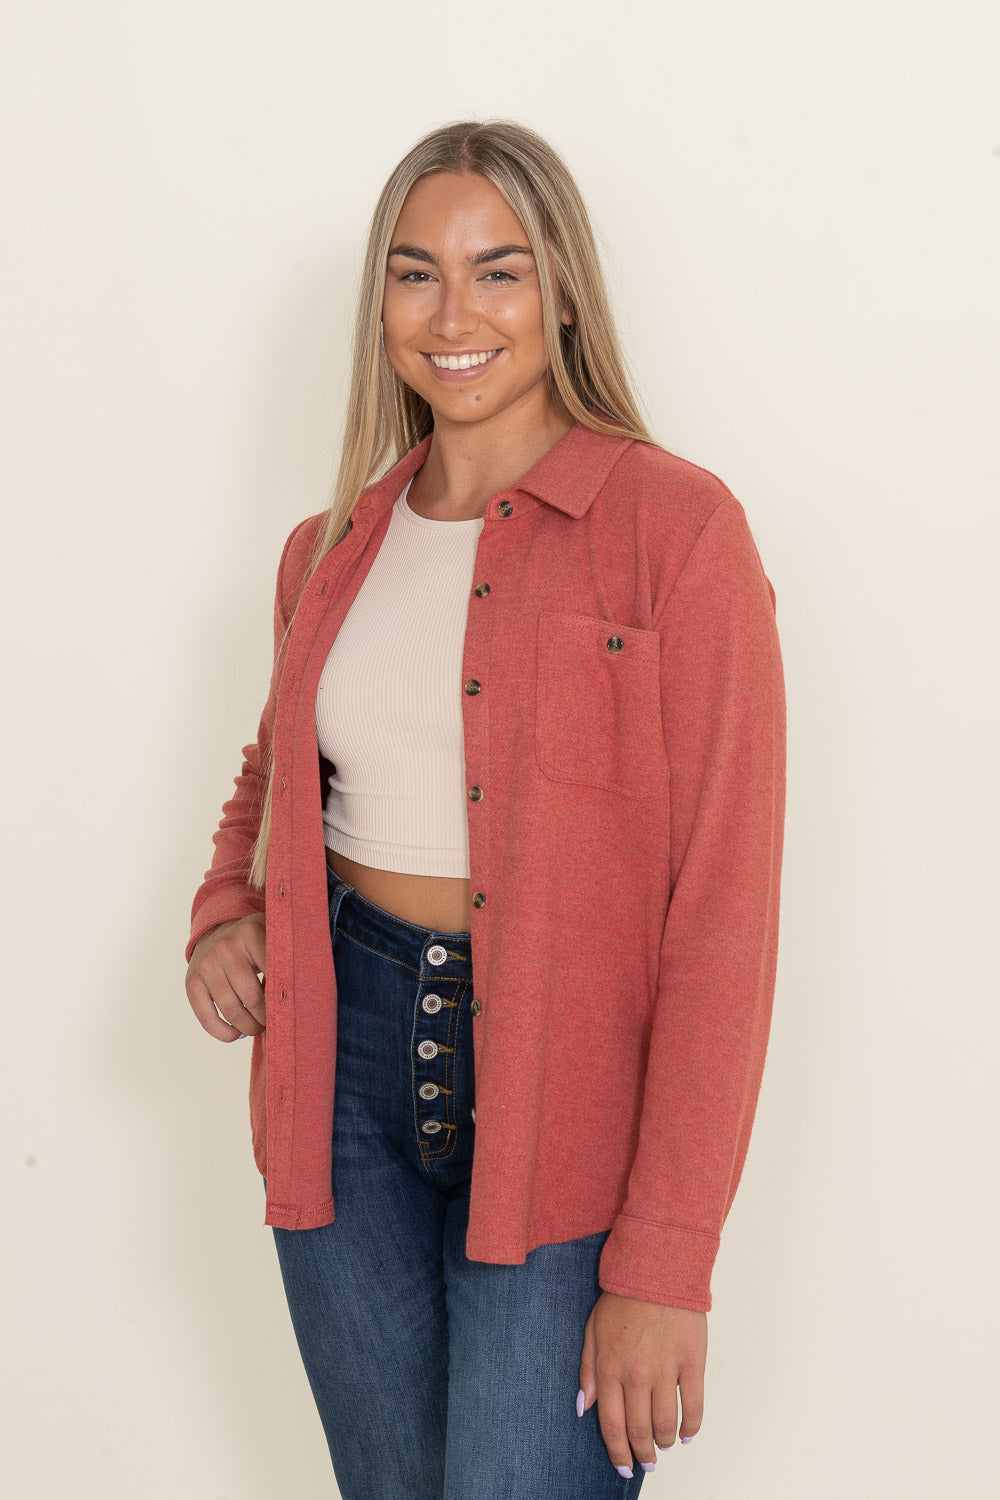 Thread & Supply Lewis Button Up Shirt for Women in Red